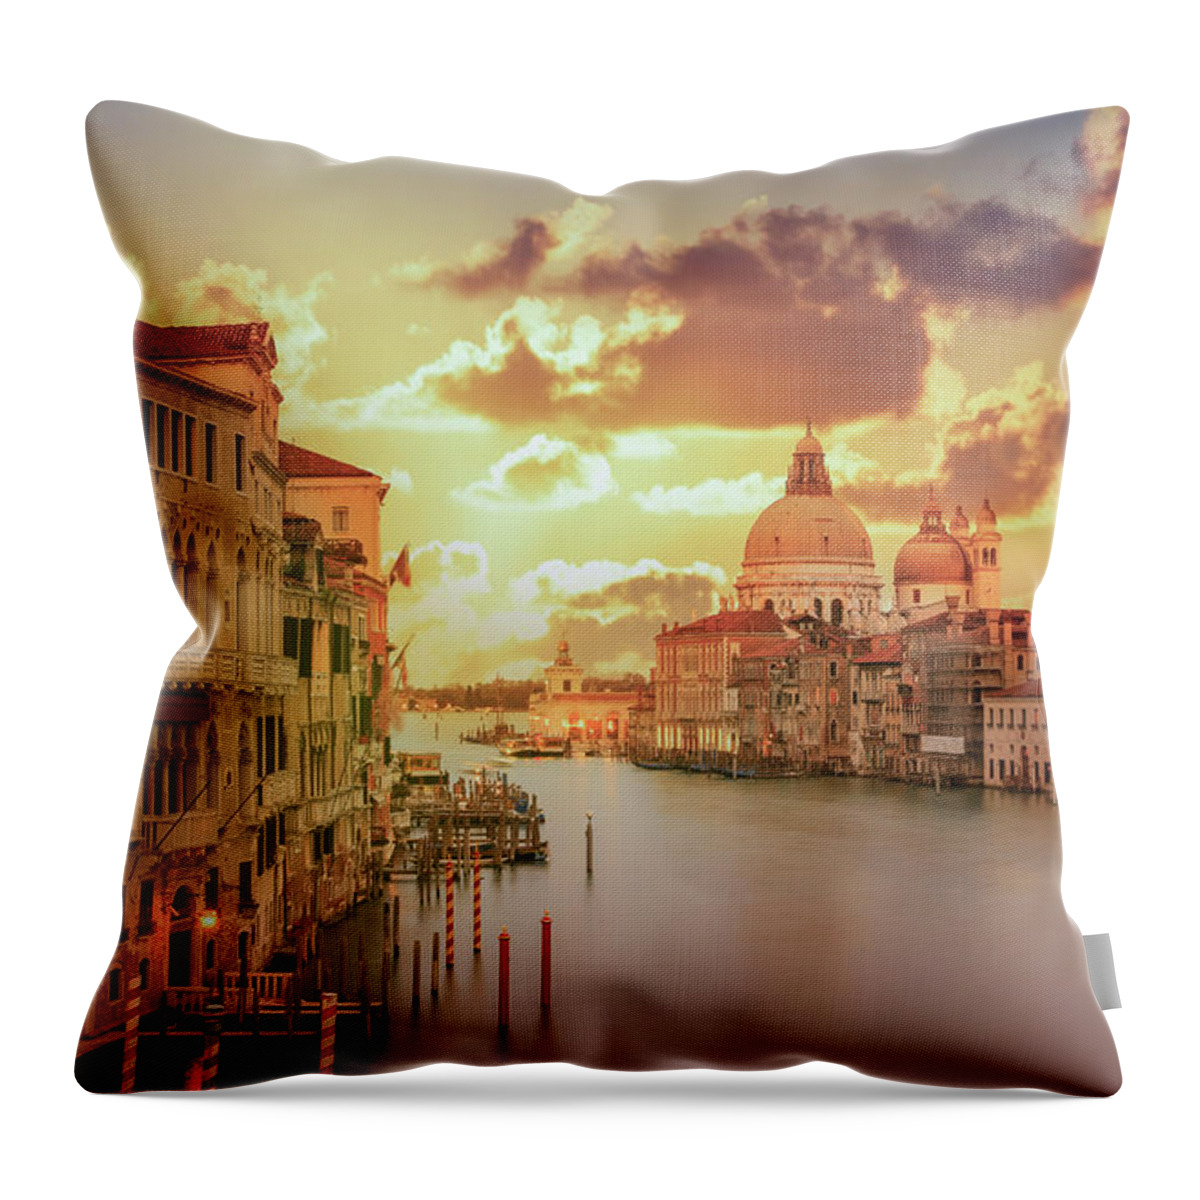 Tranquility Throw Pillow featuring the photograph Venice. The Grand Canal At Sunset #1 by Buena Vista Images